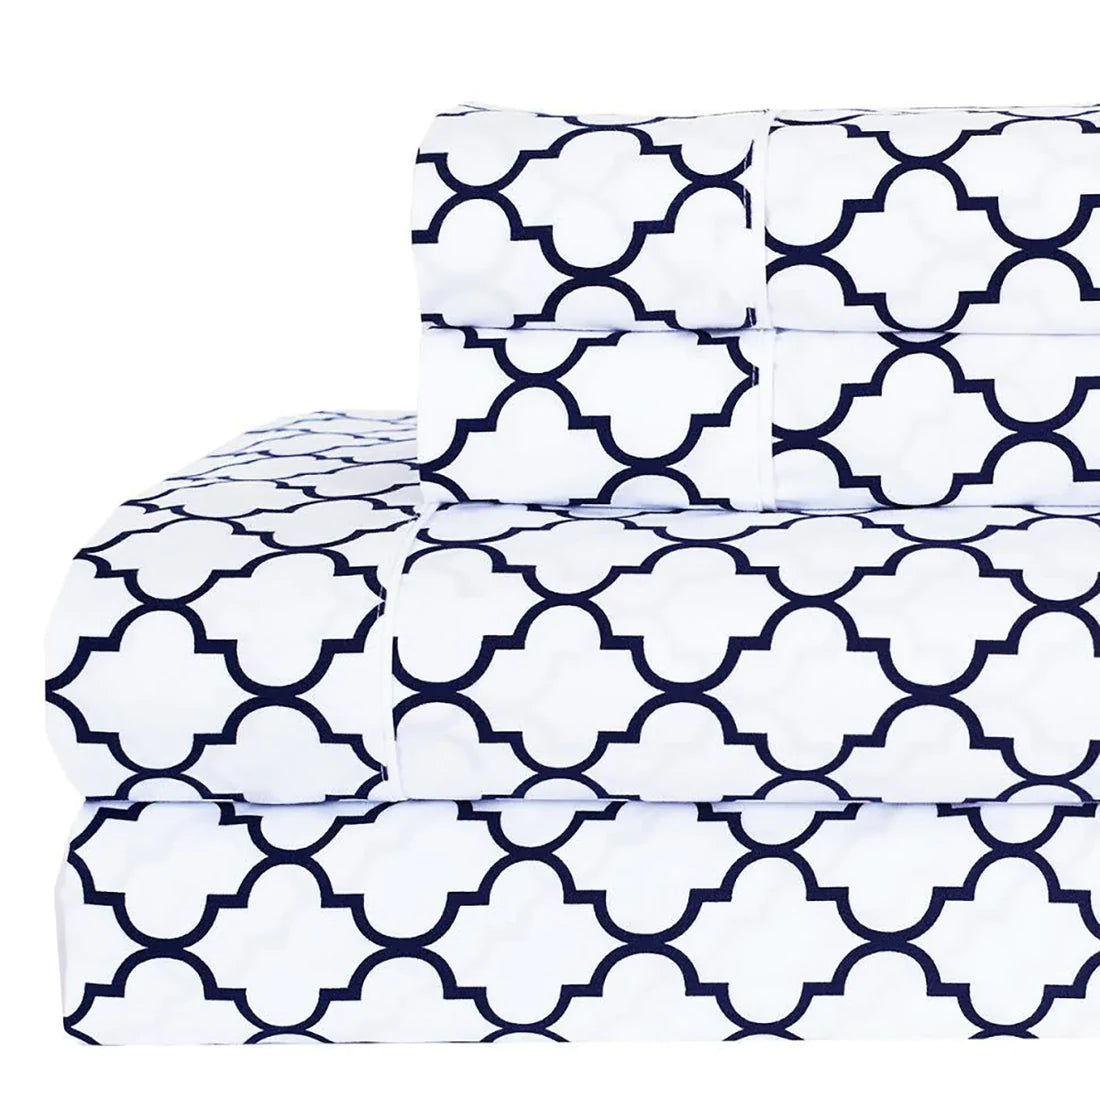 Buy Printed Meridian Percale Combed Cotton Periwinkle Sheets at- Egyptianhomelinens.com